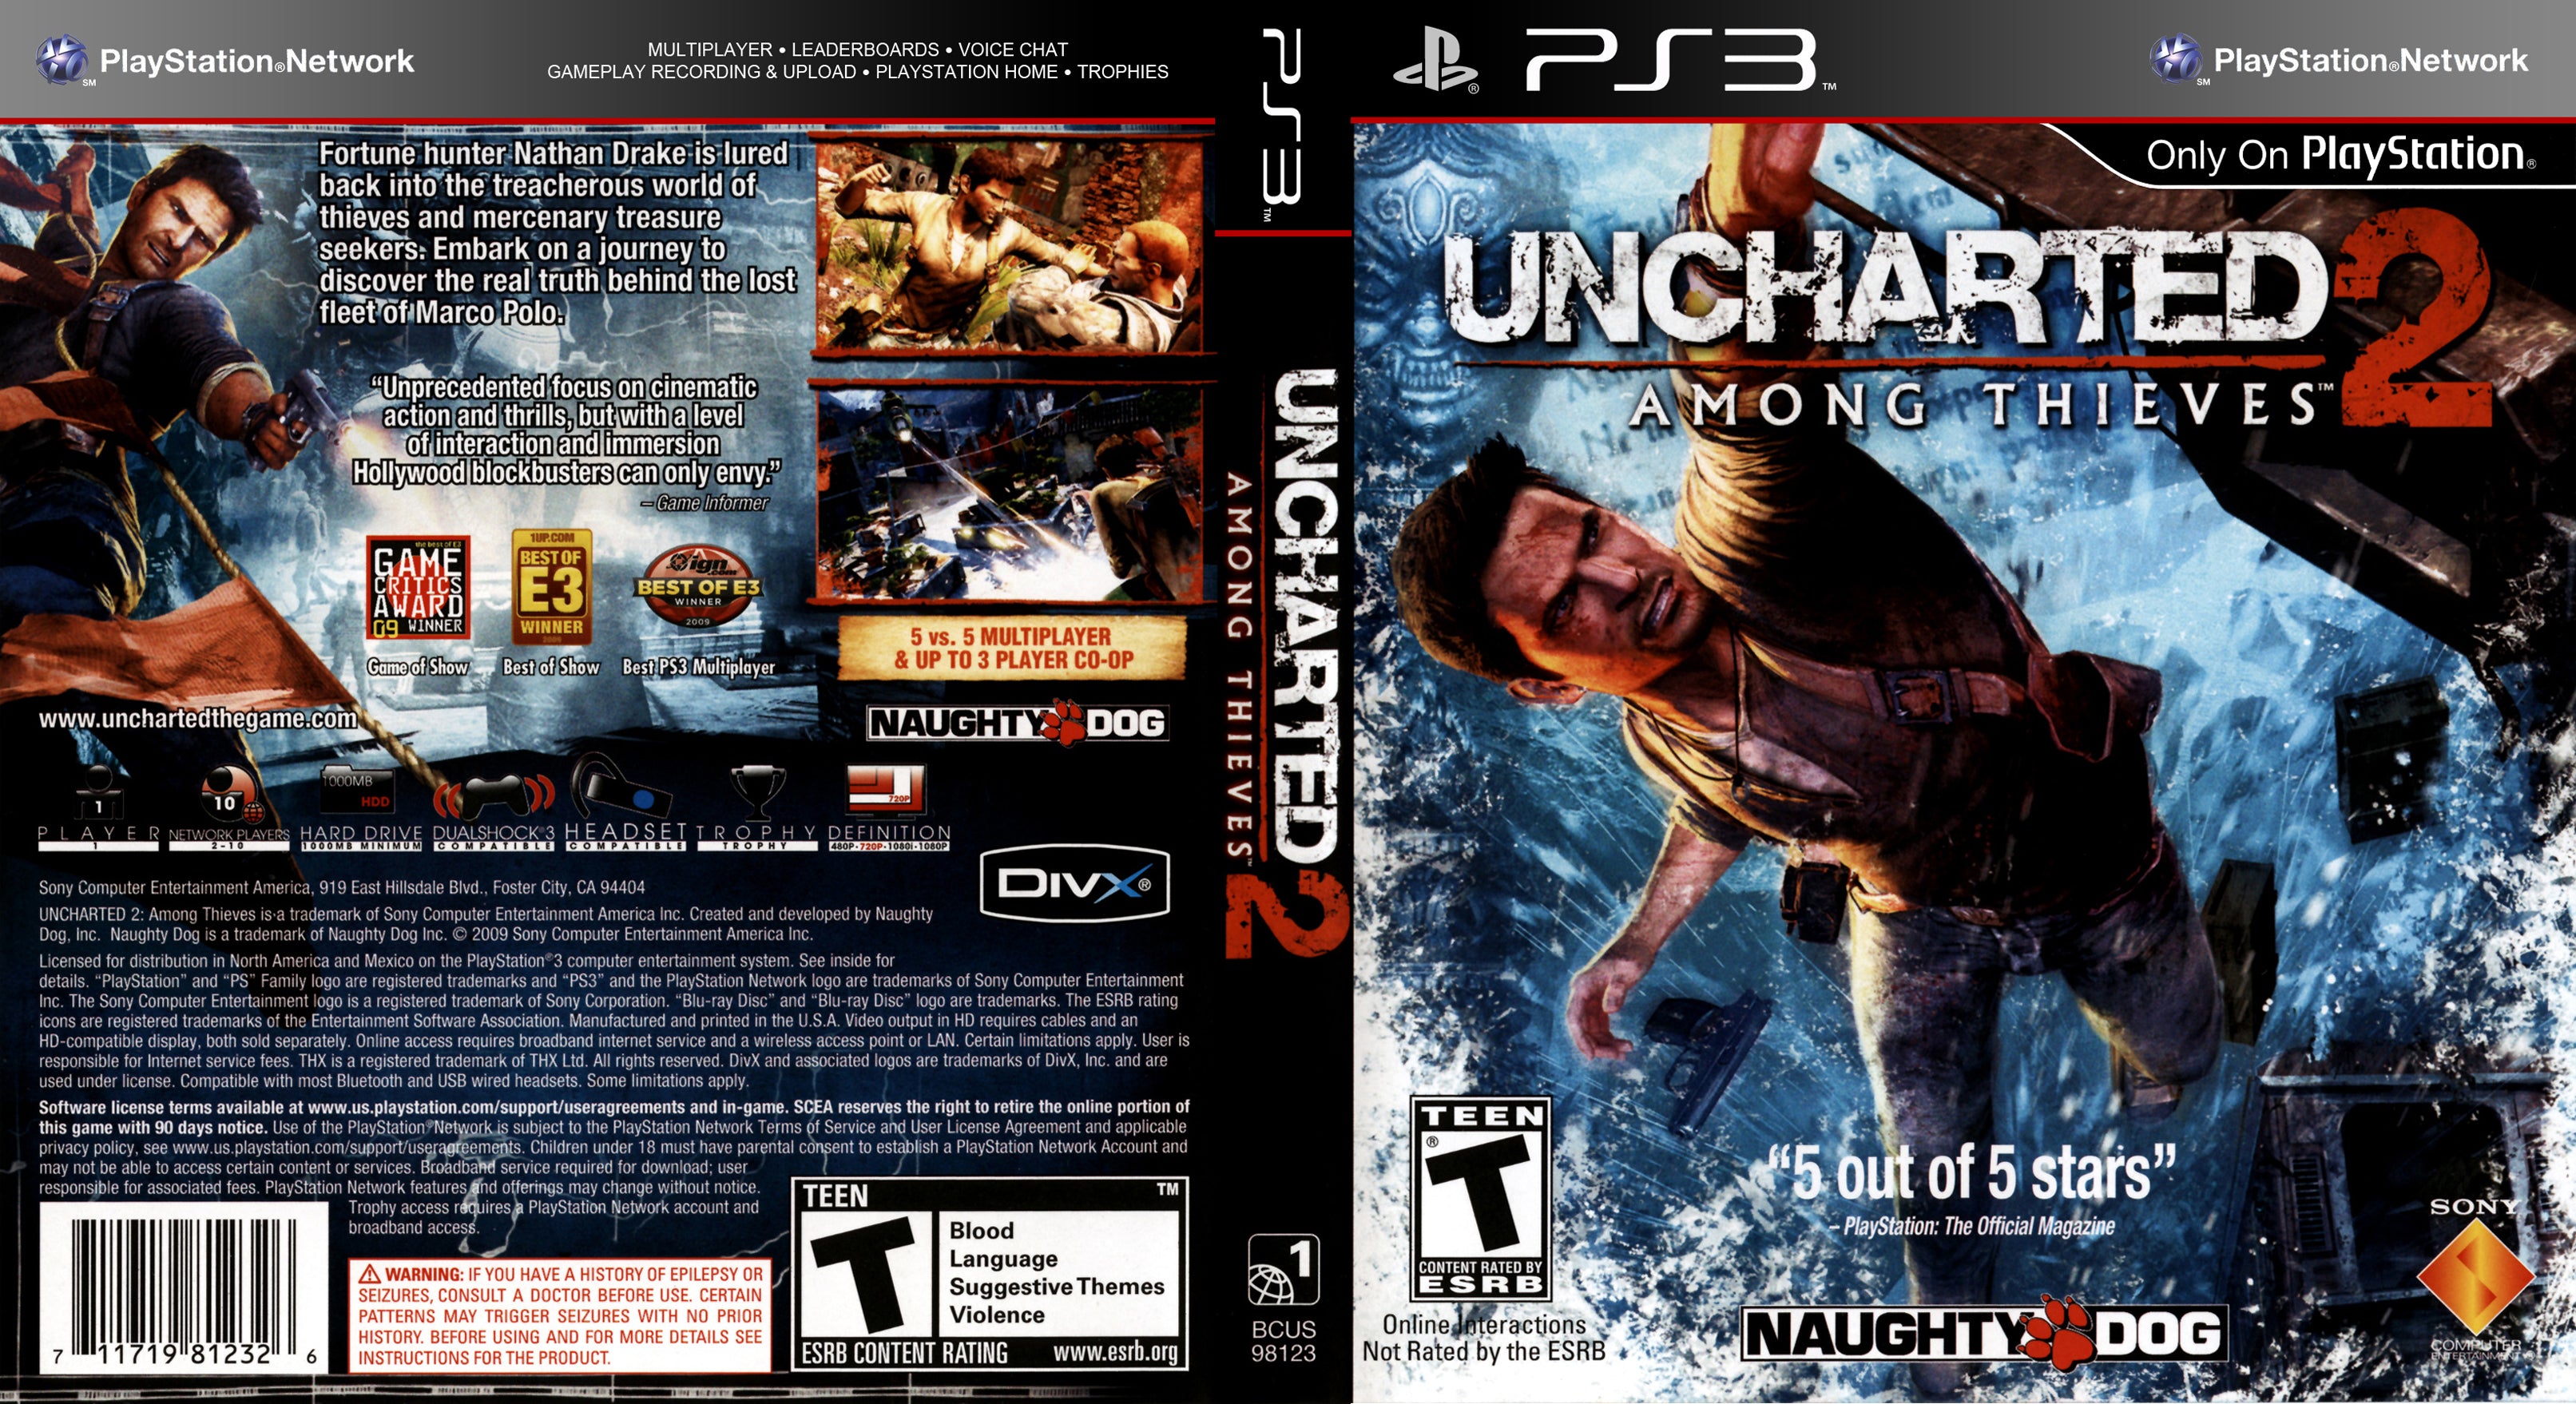 Uncharted 2: Among Thieves (Game of the Year Edition) for